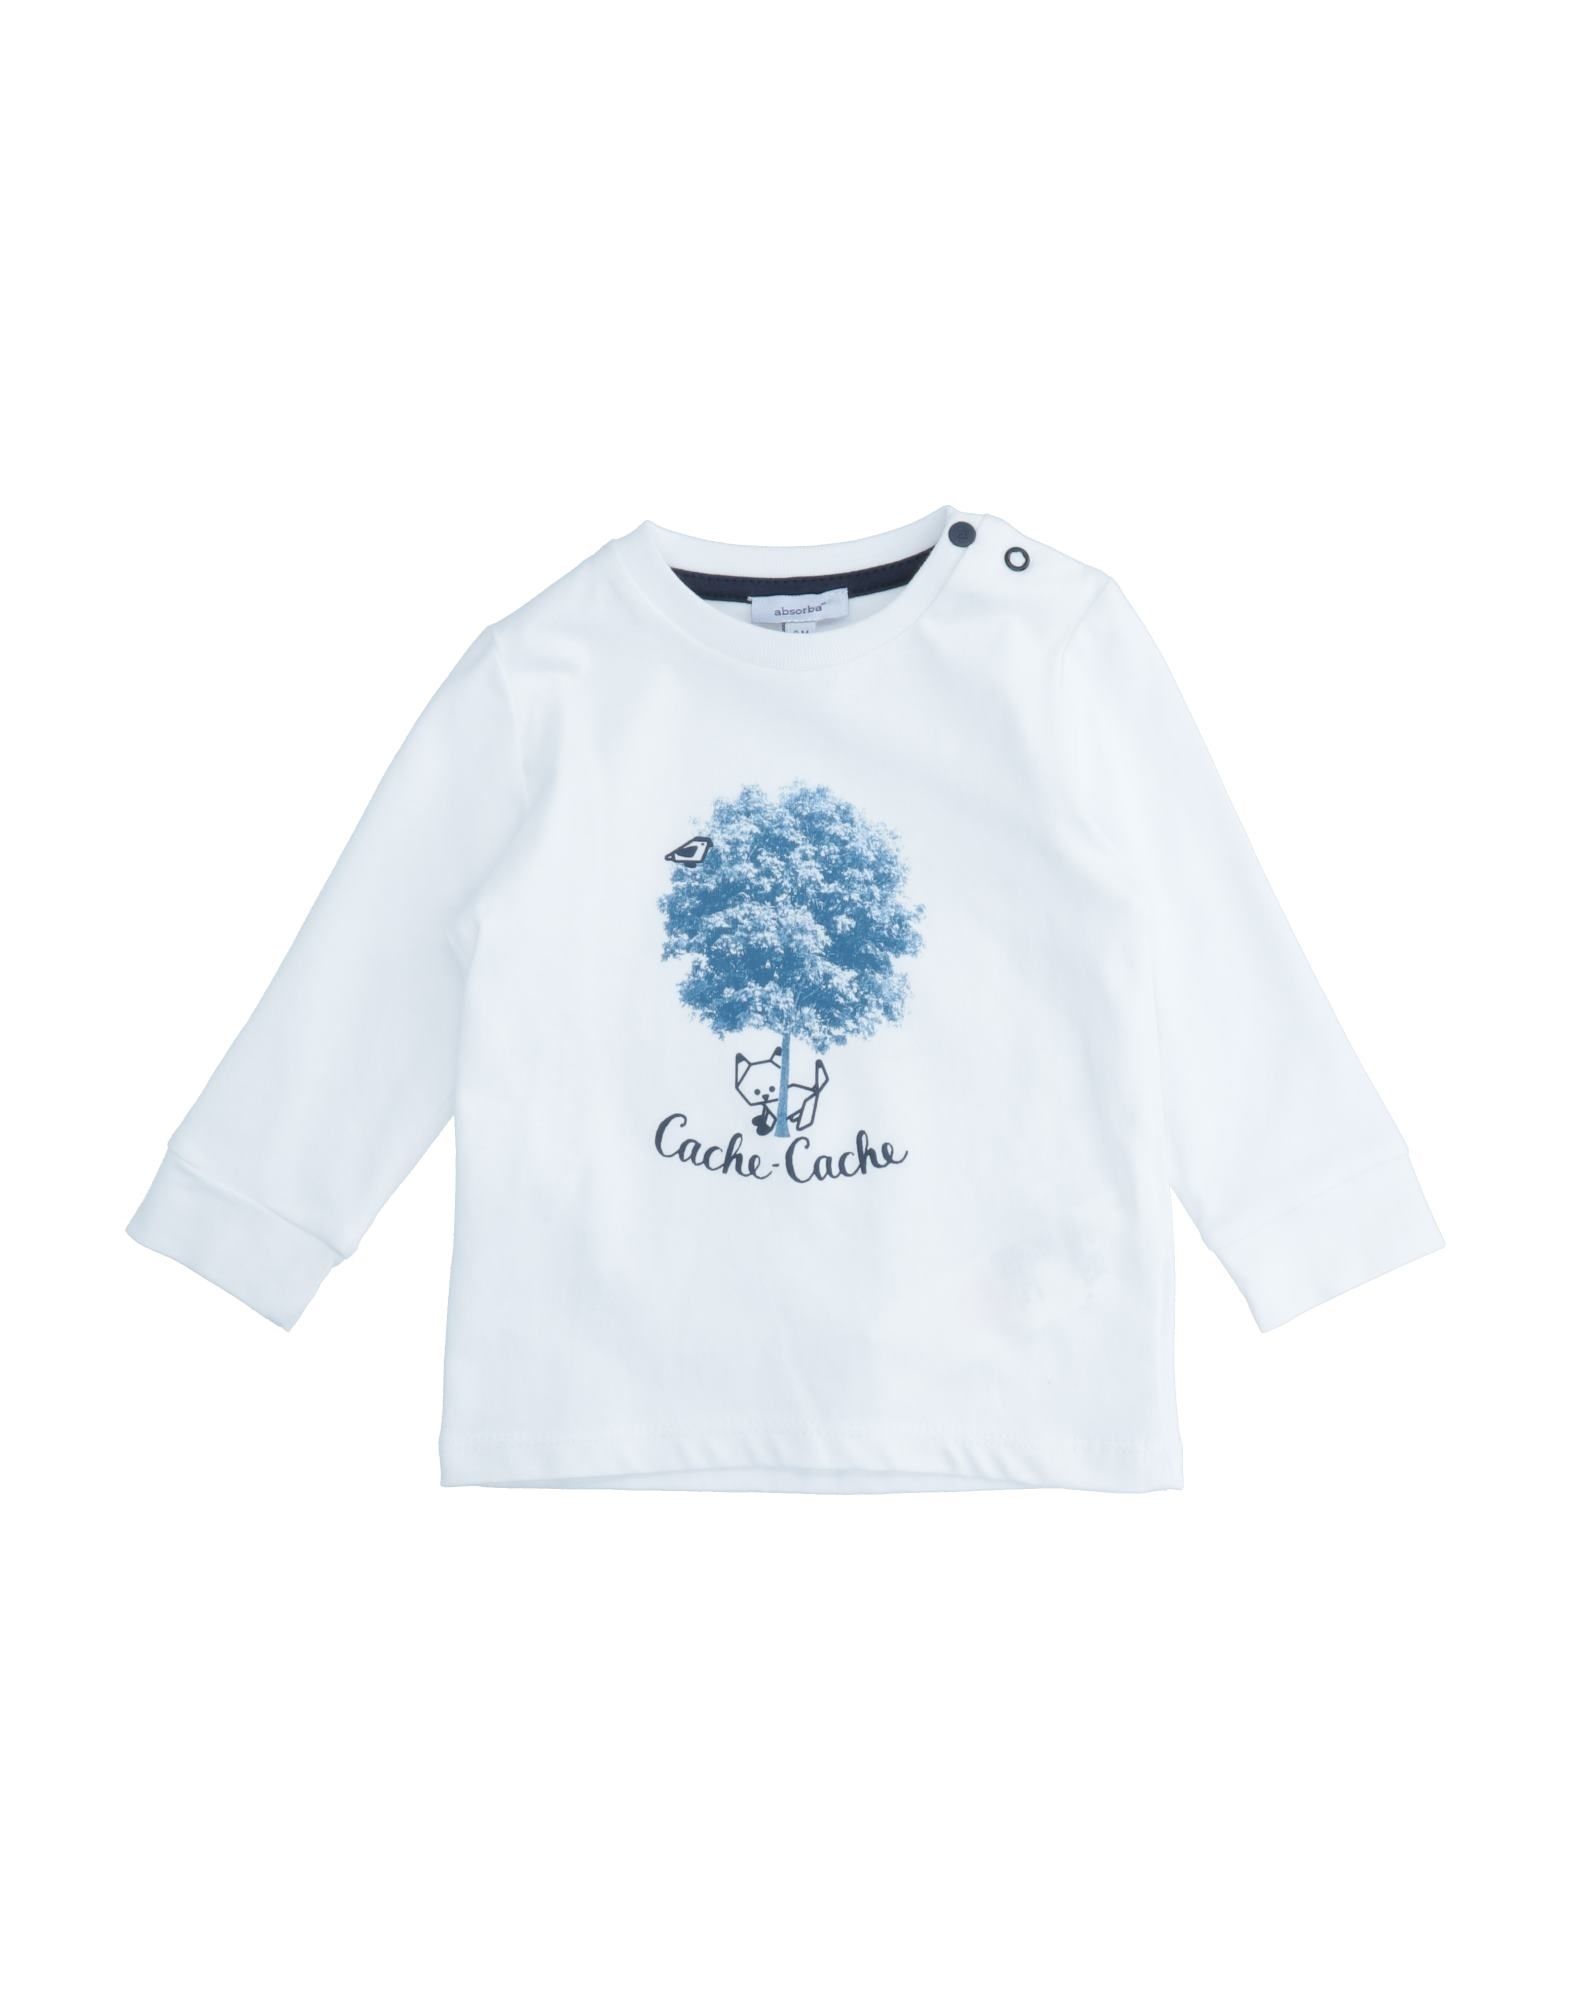 Absorba Kids' T-shirts In White